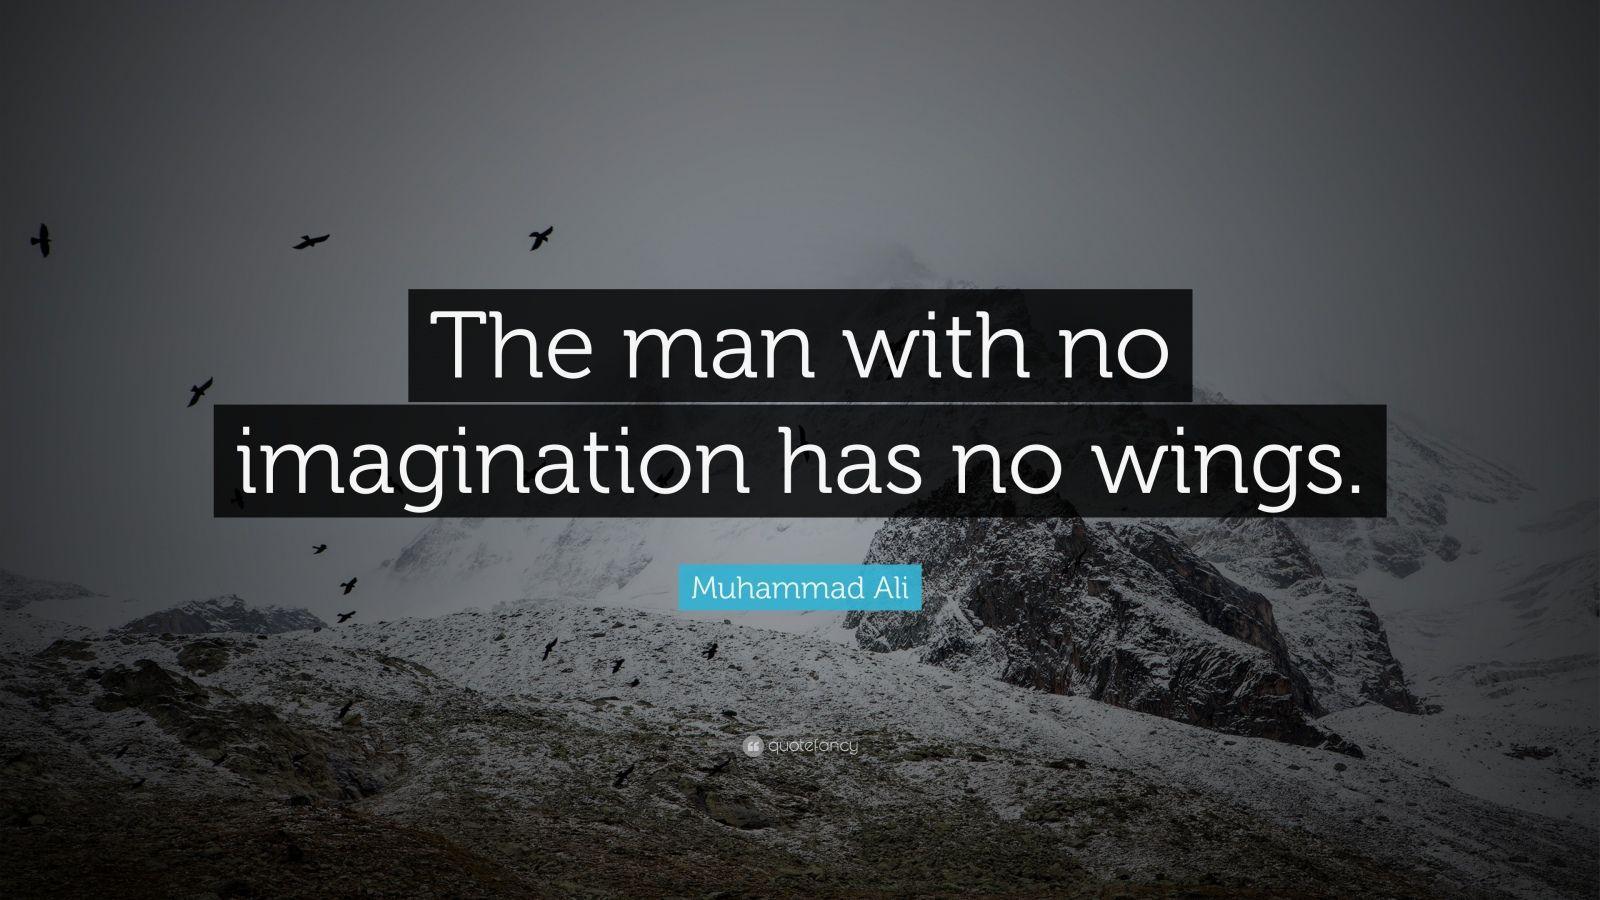 Muhammad Ali Quote: “The man with no imagination has no wings.” (21 wallpaper)